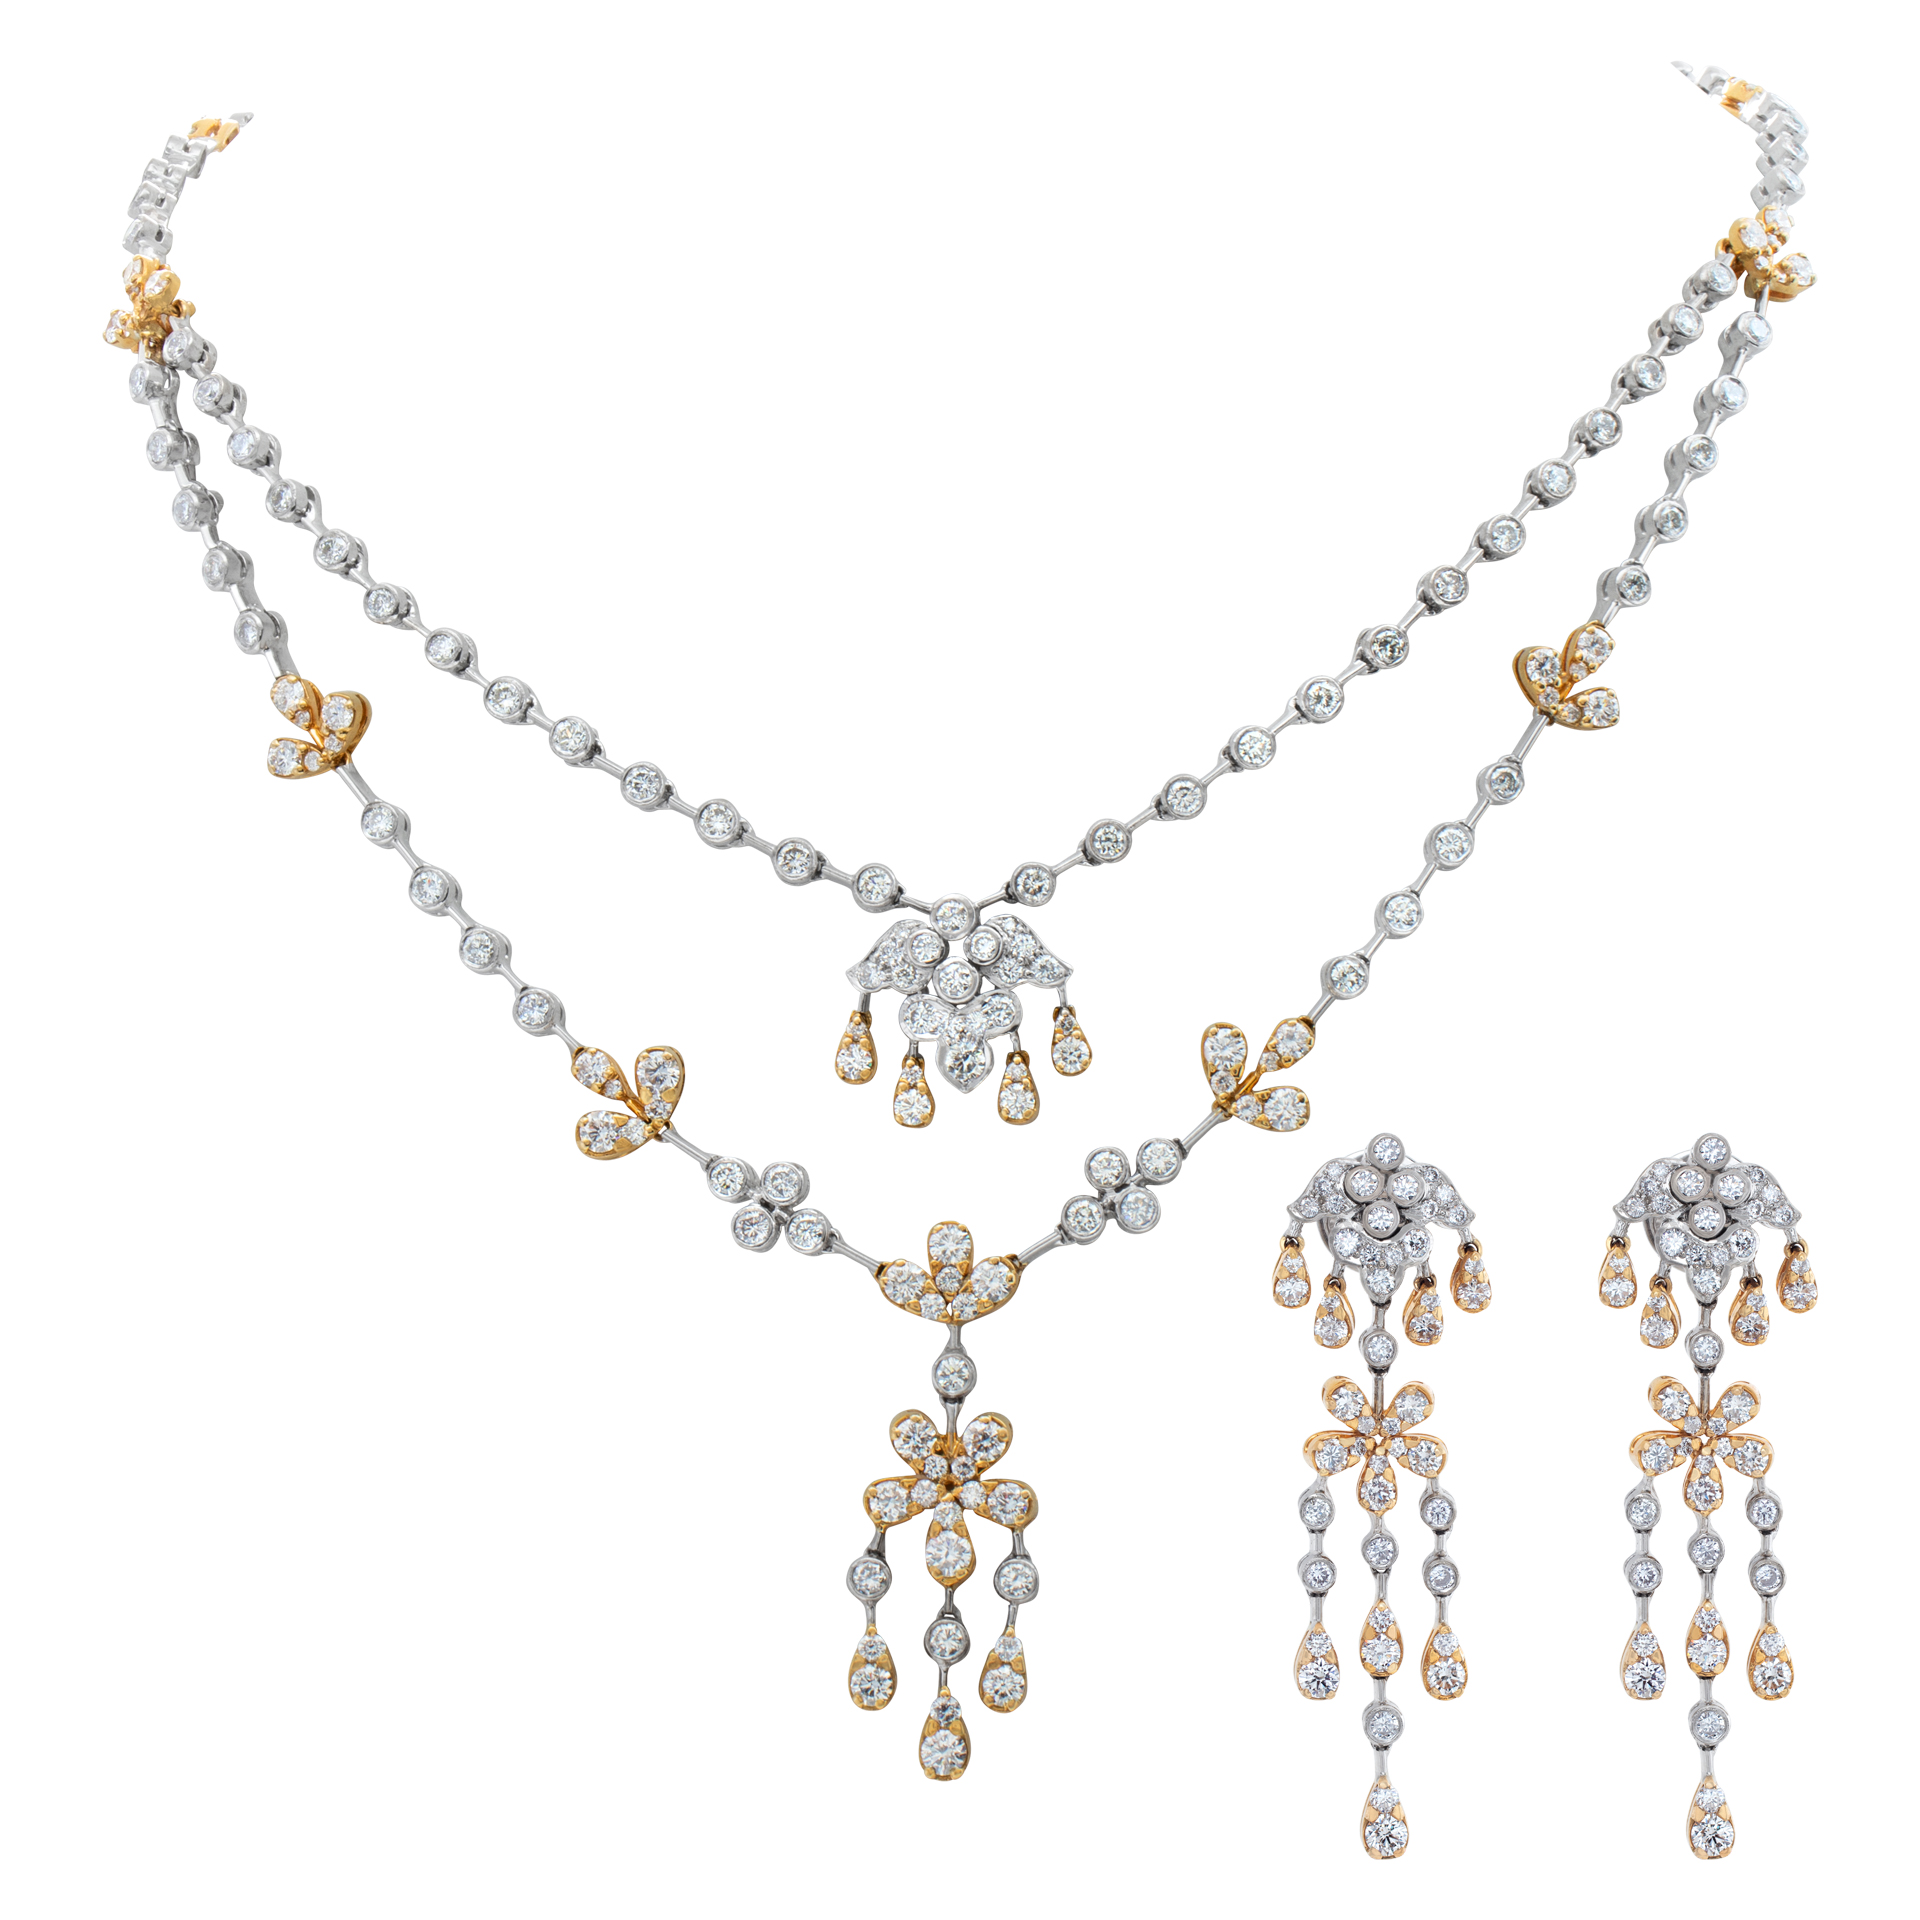 Diamond set necklace and earrings in 18k white and yellow gold